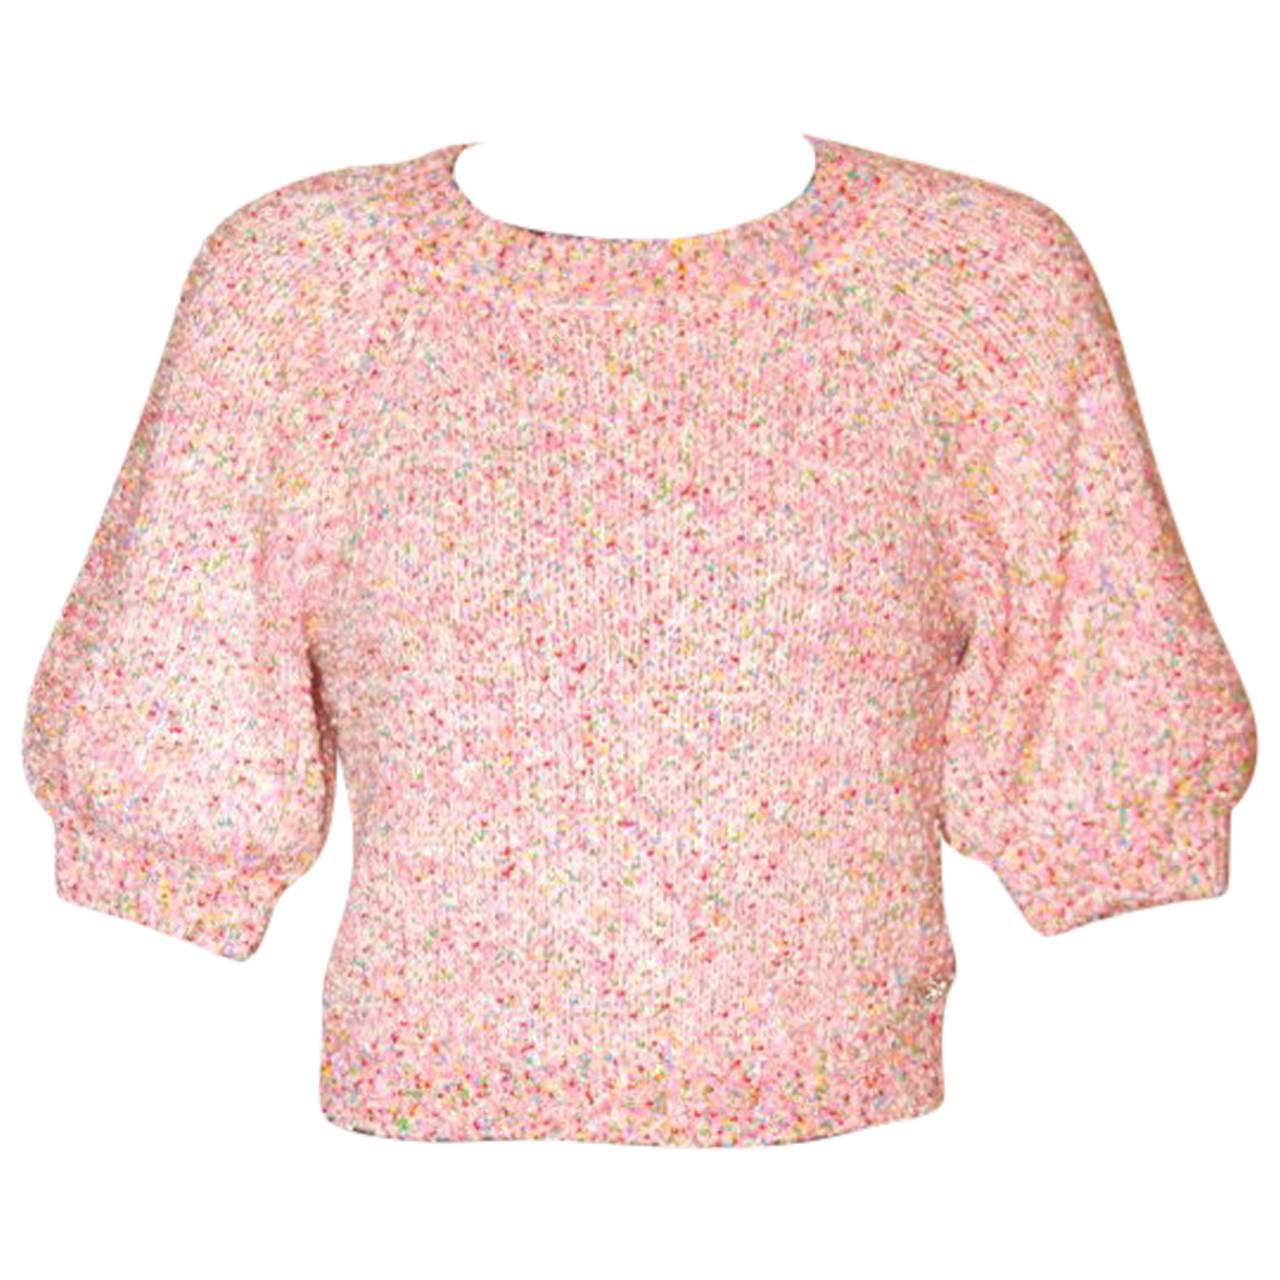 Chanel Pink Crewneck Sweater – 2016 Paris Seoul Cruise Collection – Like New